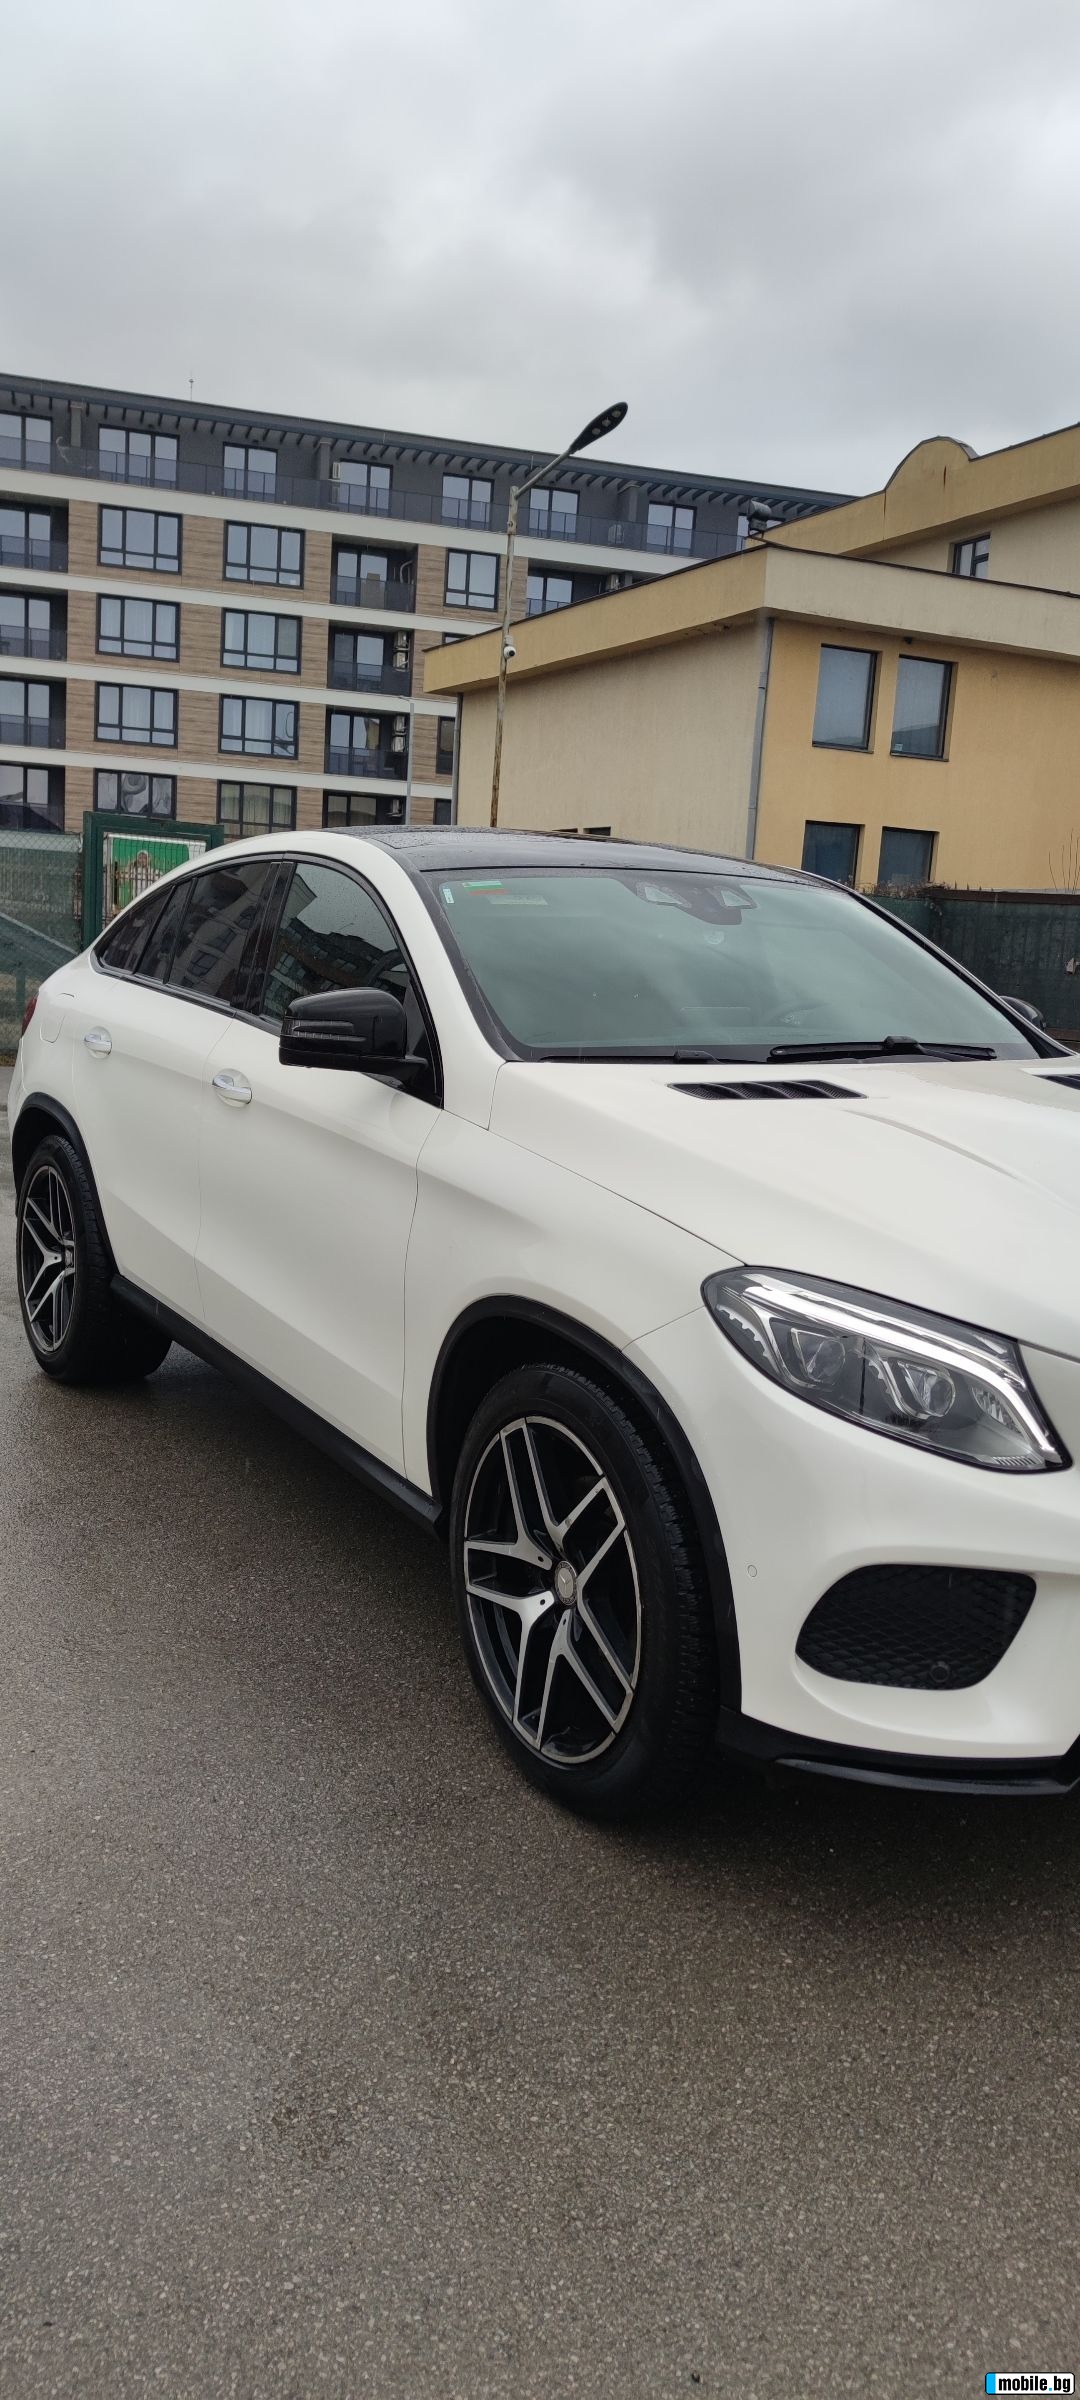 Mercedes-Benz GLE Coupe AMG -  360- . 350.D | Mobile.bg   3